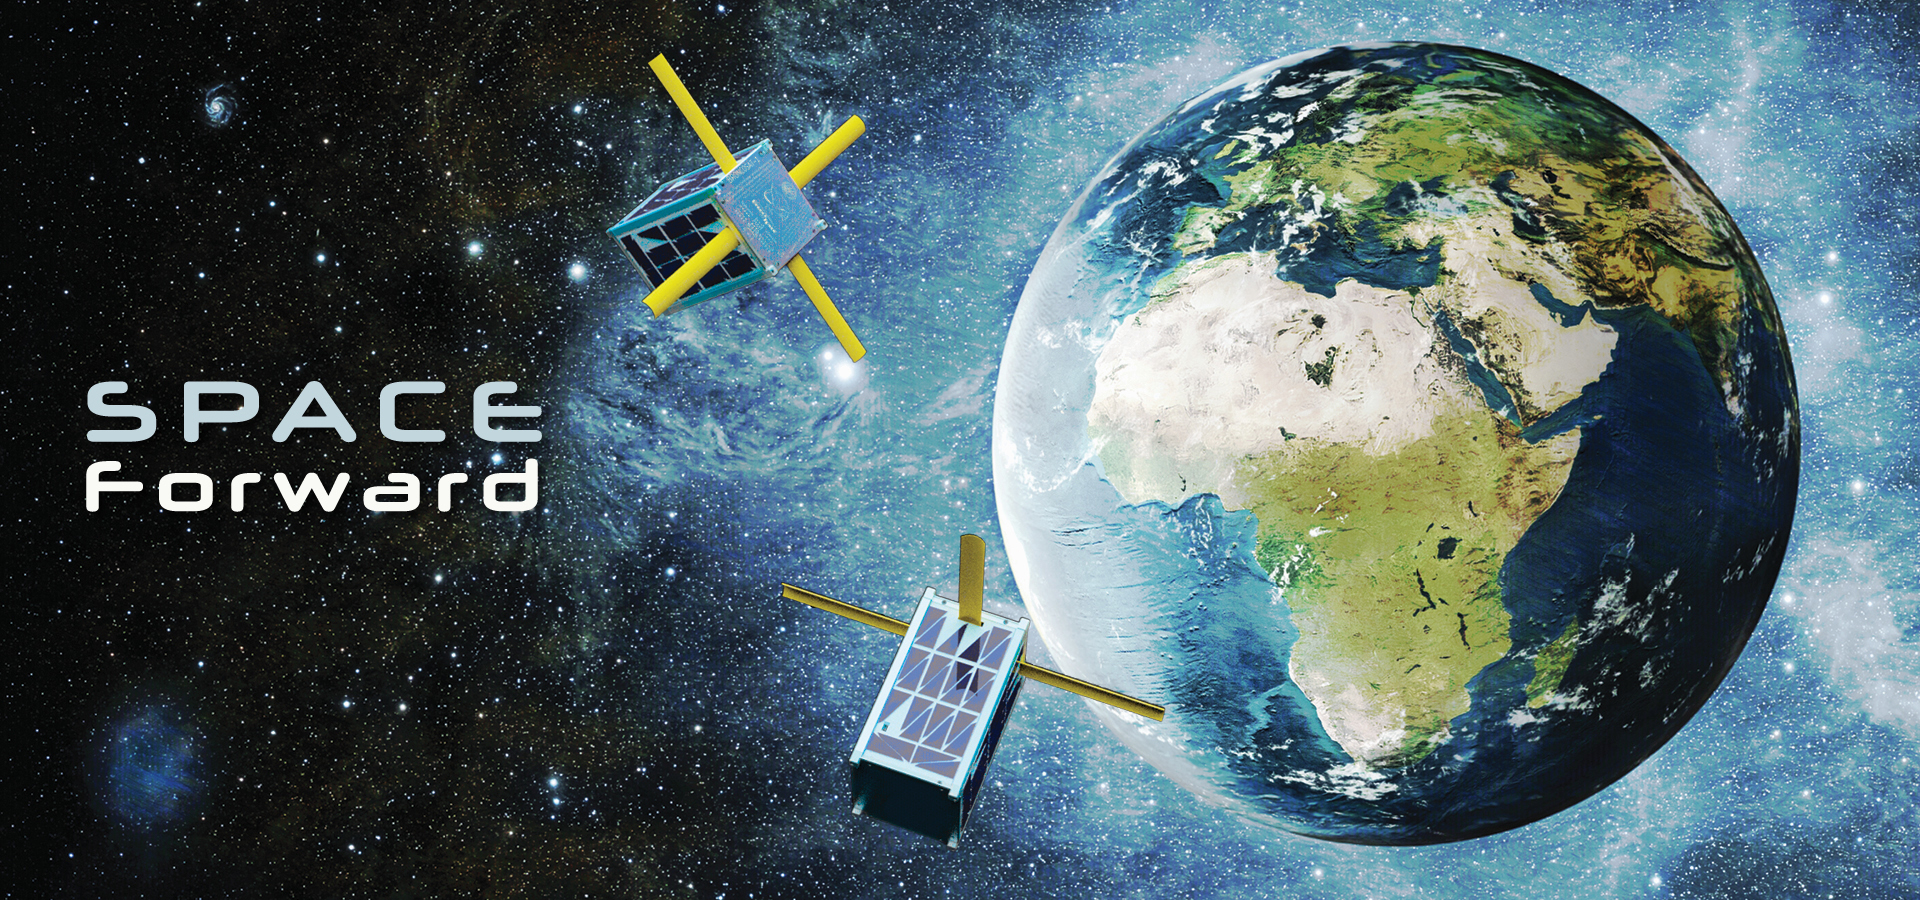 A CubeSat floating in space near Earth.